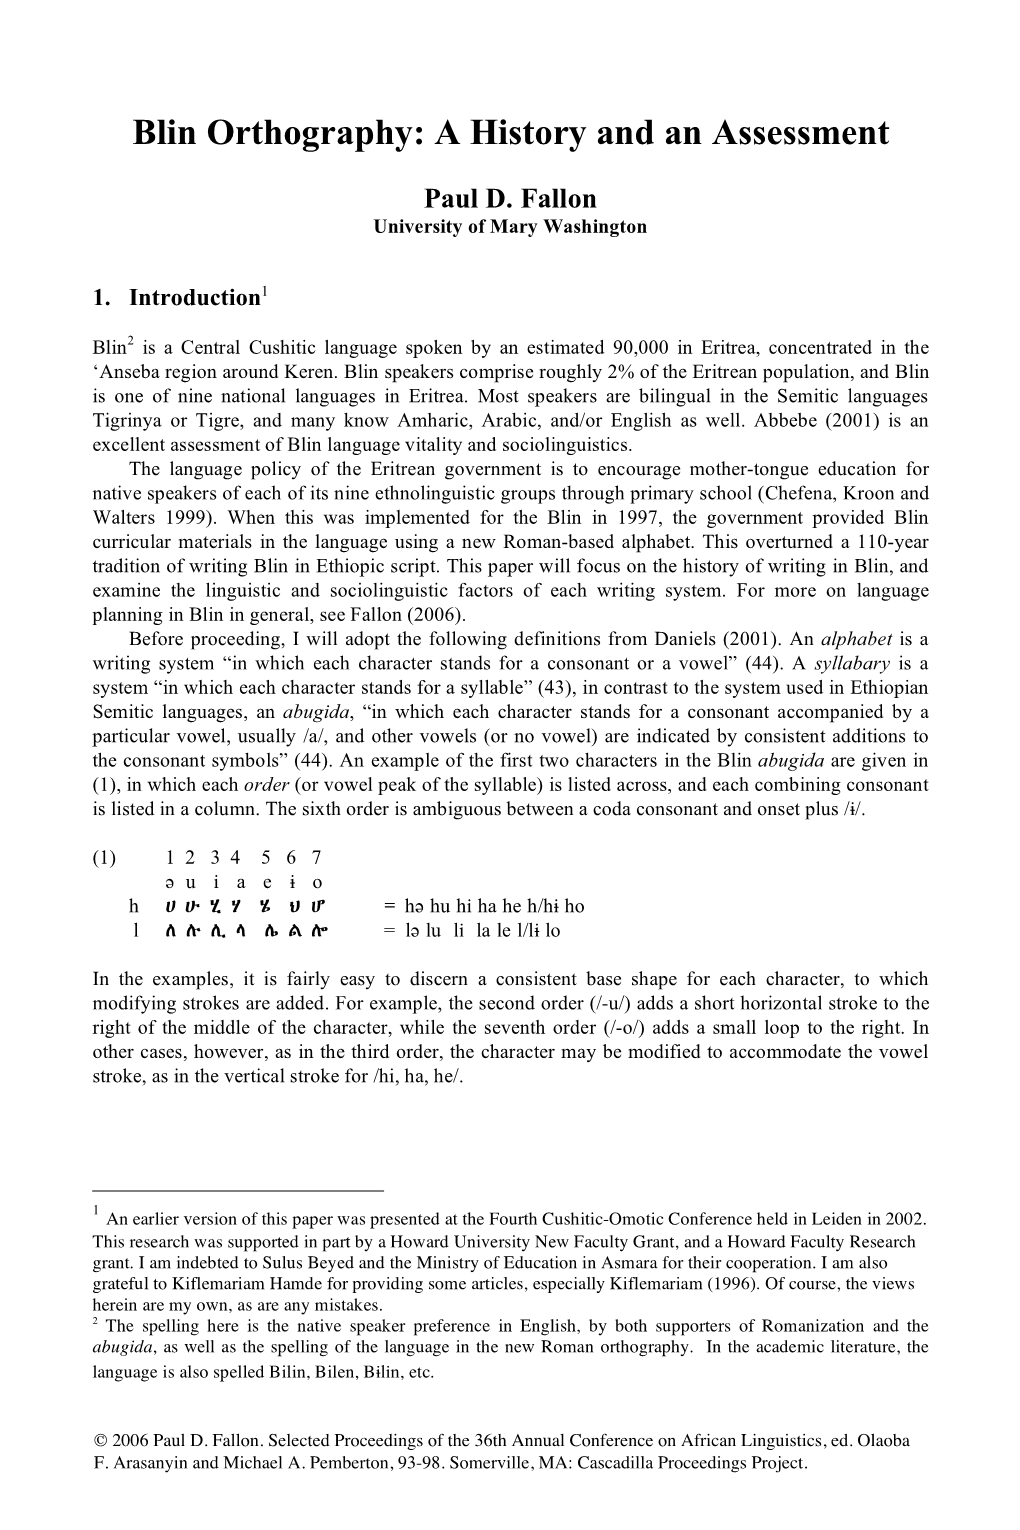 Blin Orthography: a History and an Assessment